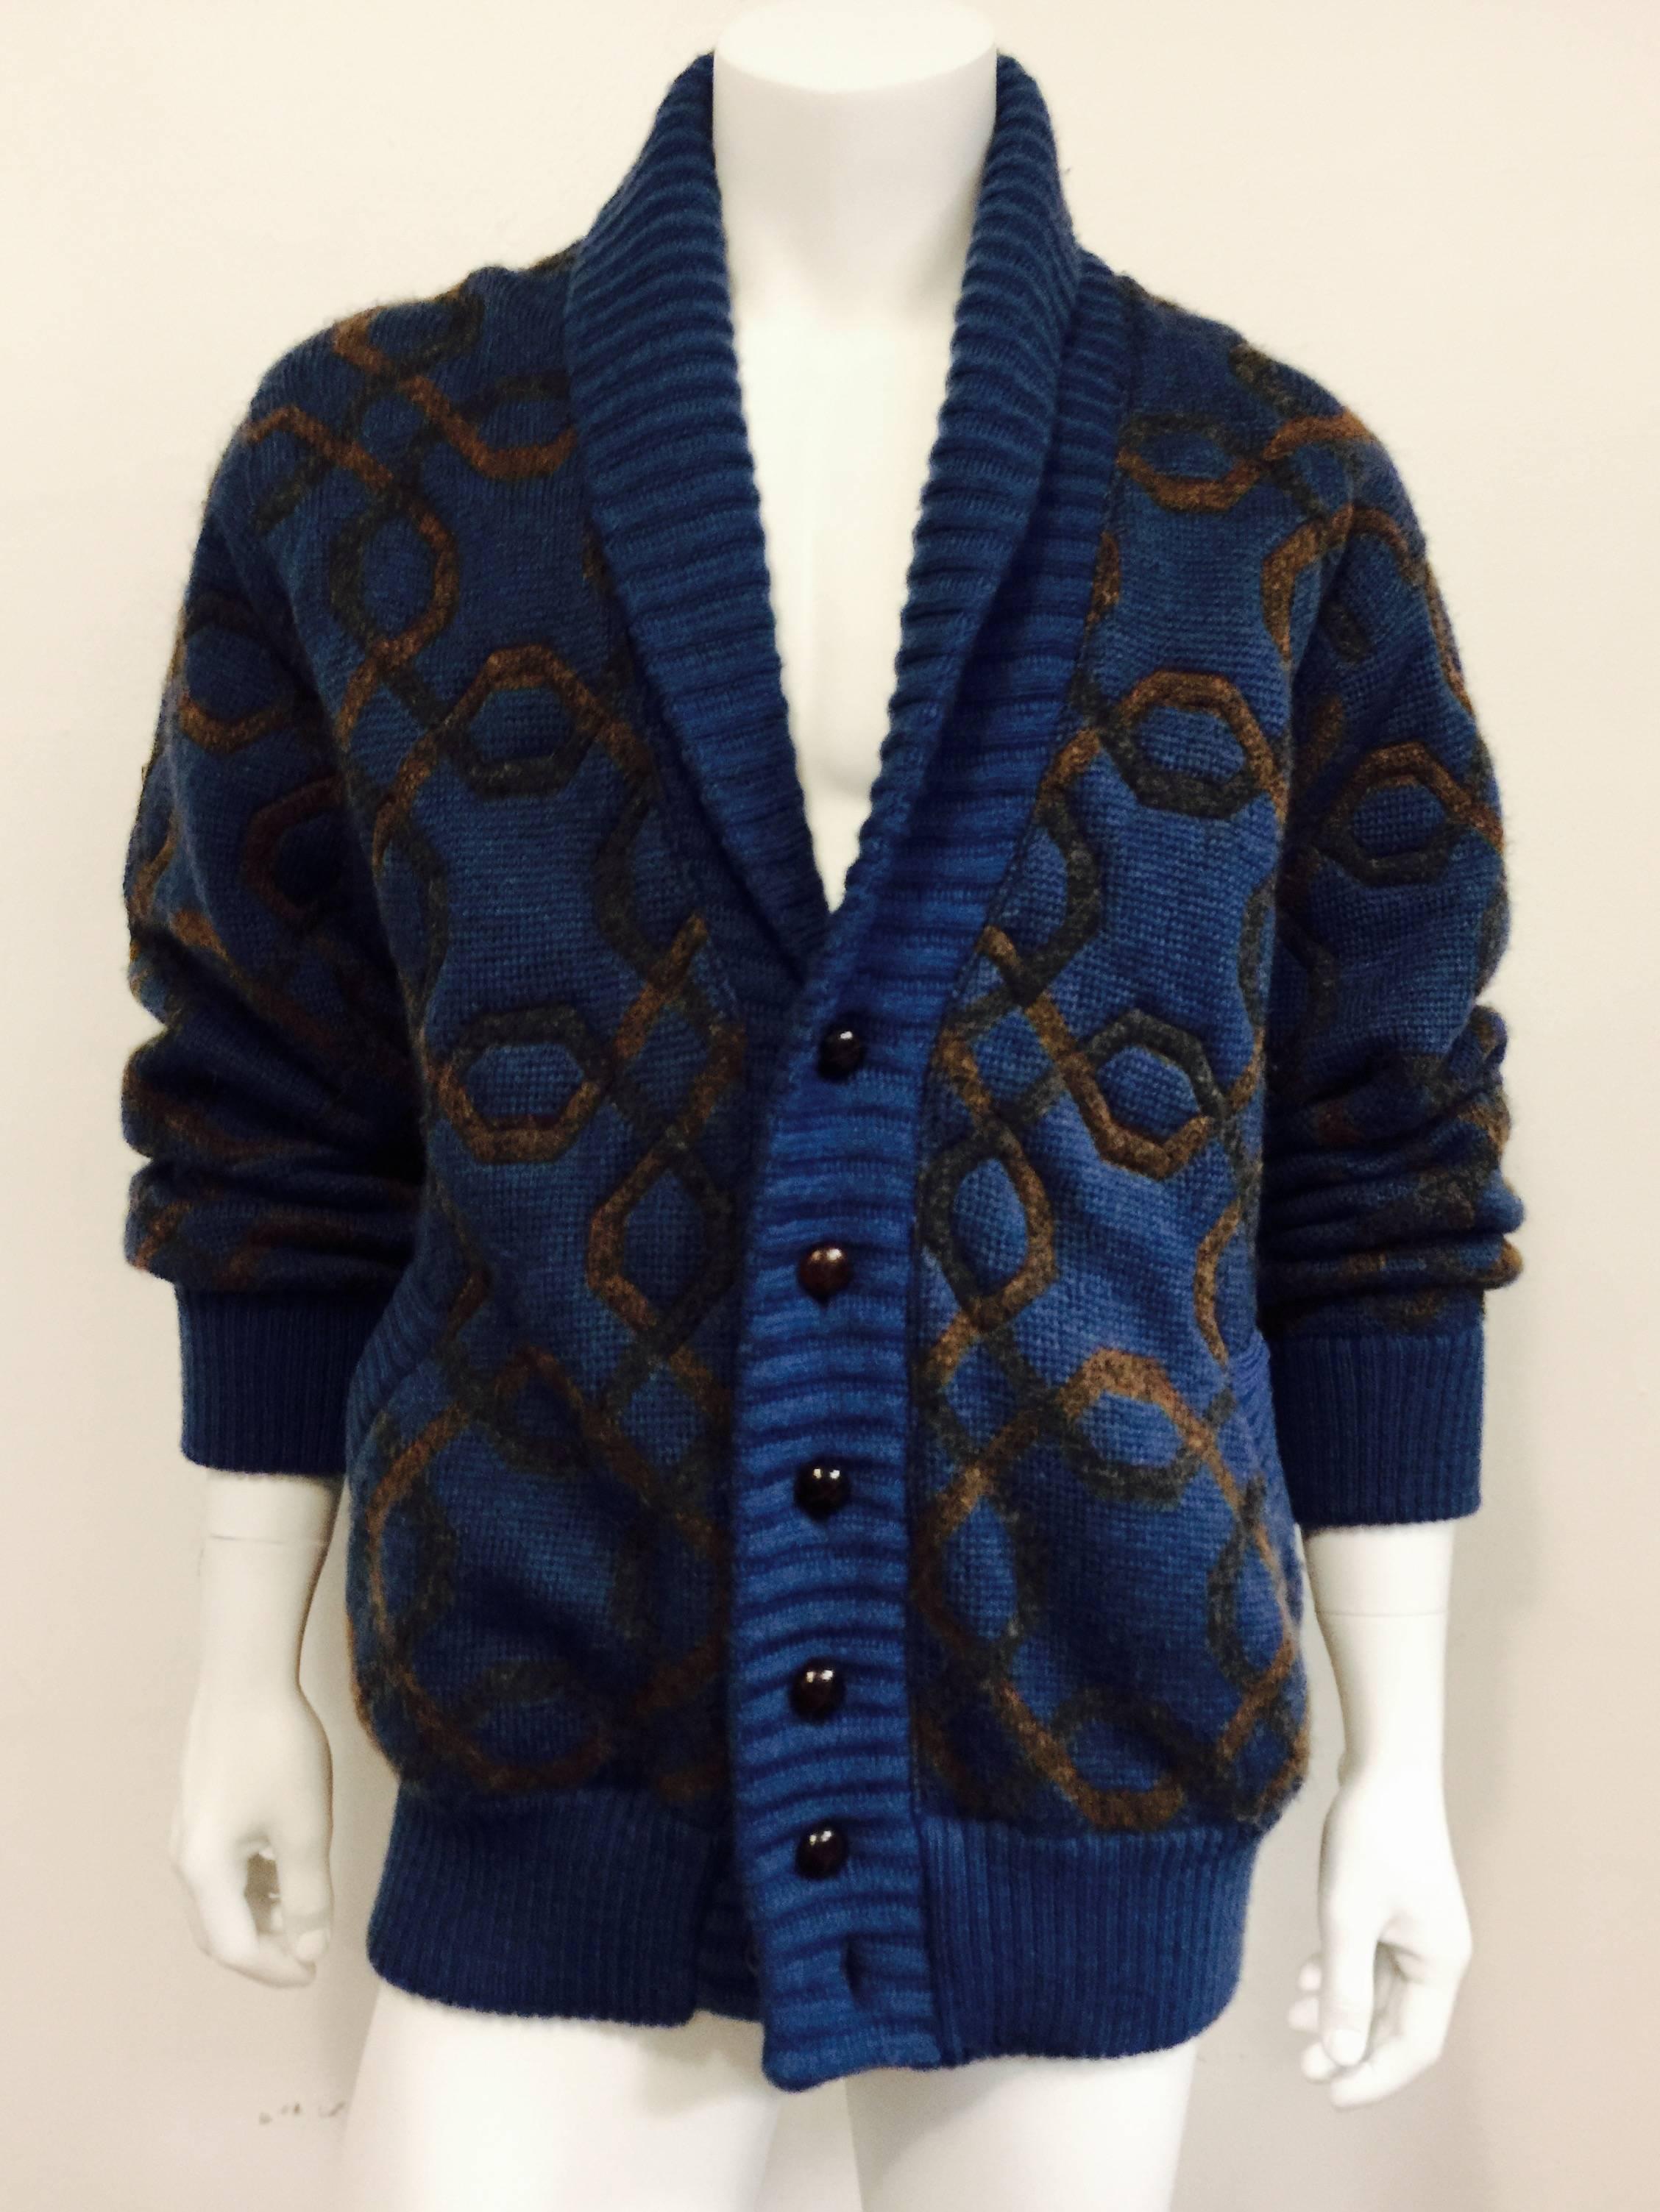 Fab vintage 1970's cuddly "cardie" from the House of Gucci featuring a chain pattern, with solid shawl collar, welted cuffs and hem and six leather covered buttons.  There are two welted slit pockets on the front.  Heavy enough for